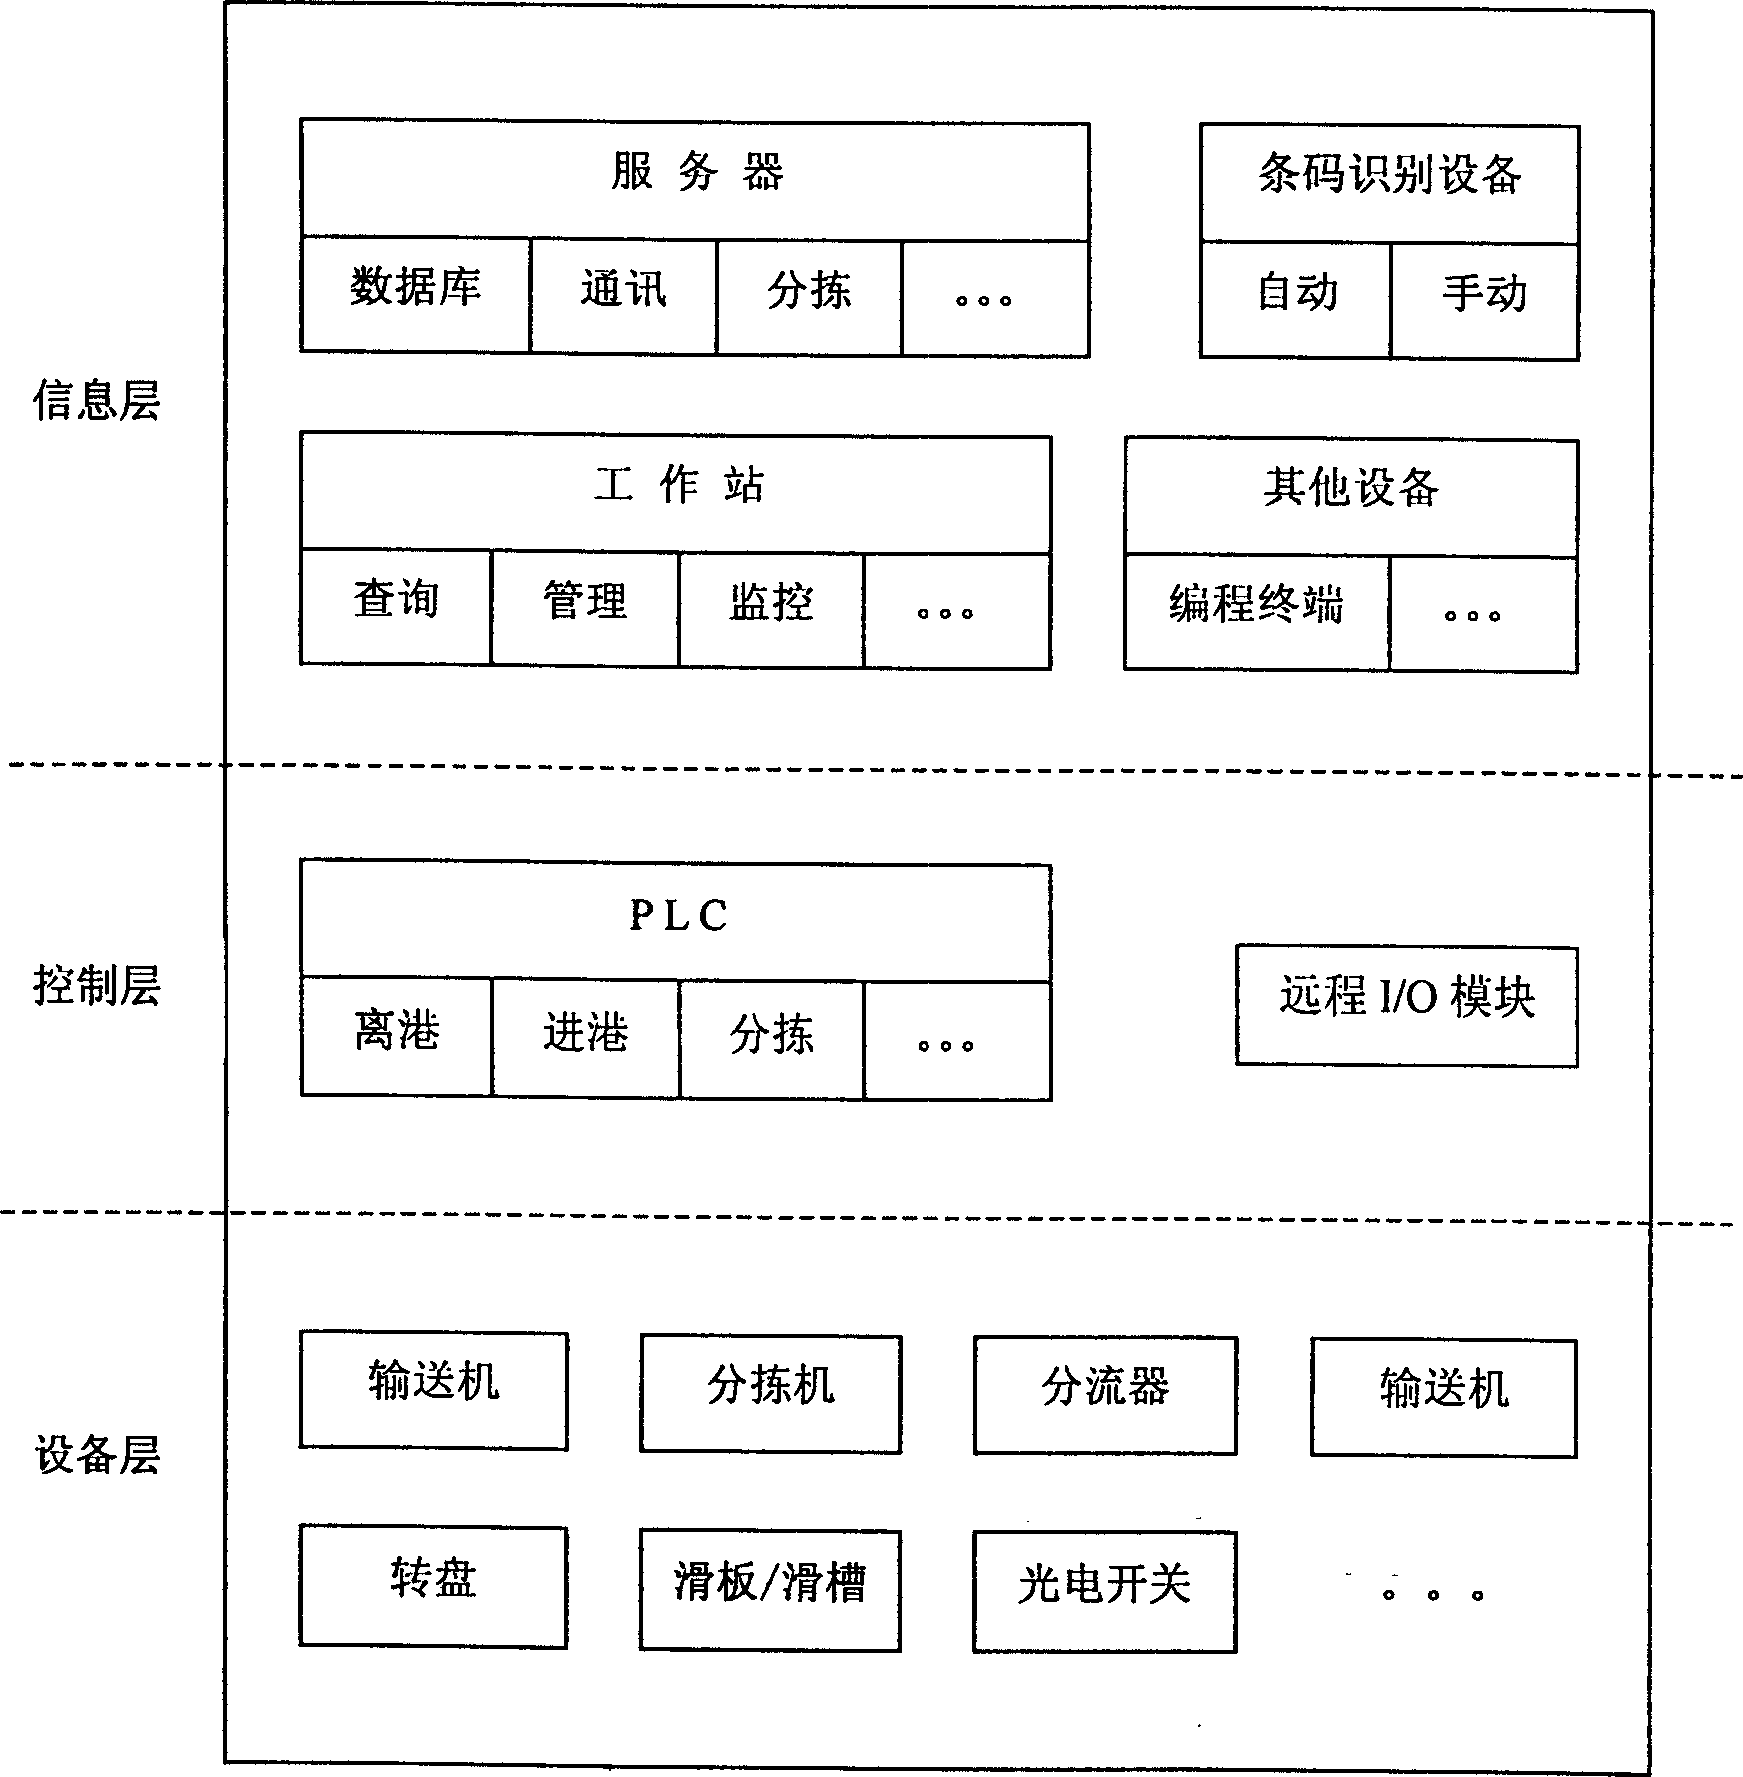 Automatic processing system for luggage in airport and its processing method